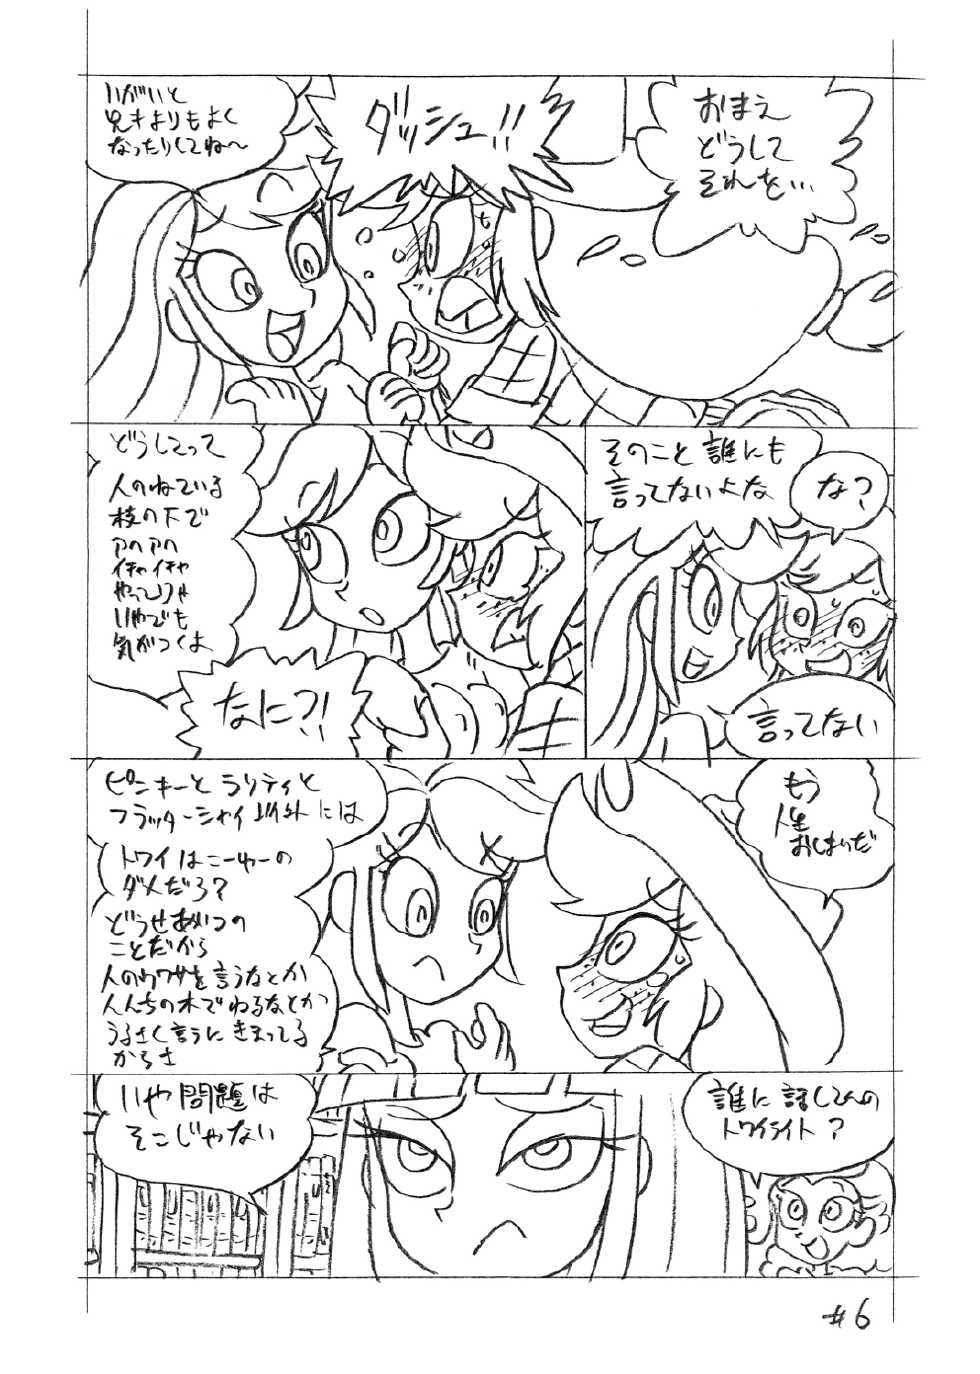 [Union of the Snake (Shinda Mane)] Psychosomatic Counterfeit EX- A.J. in E.G. Style (Ver. 02) (My Little Pony: Friendship Is Magic) - Page 5